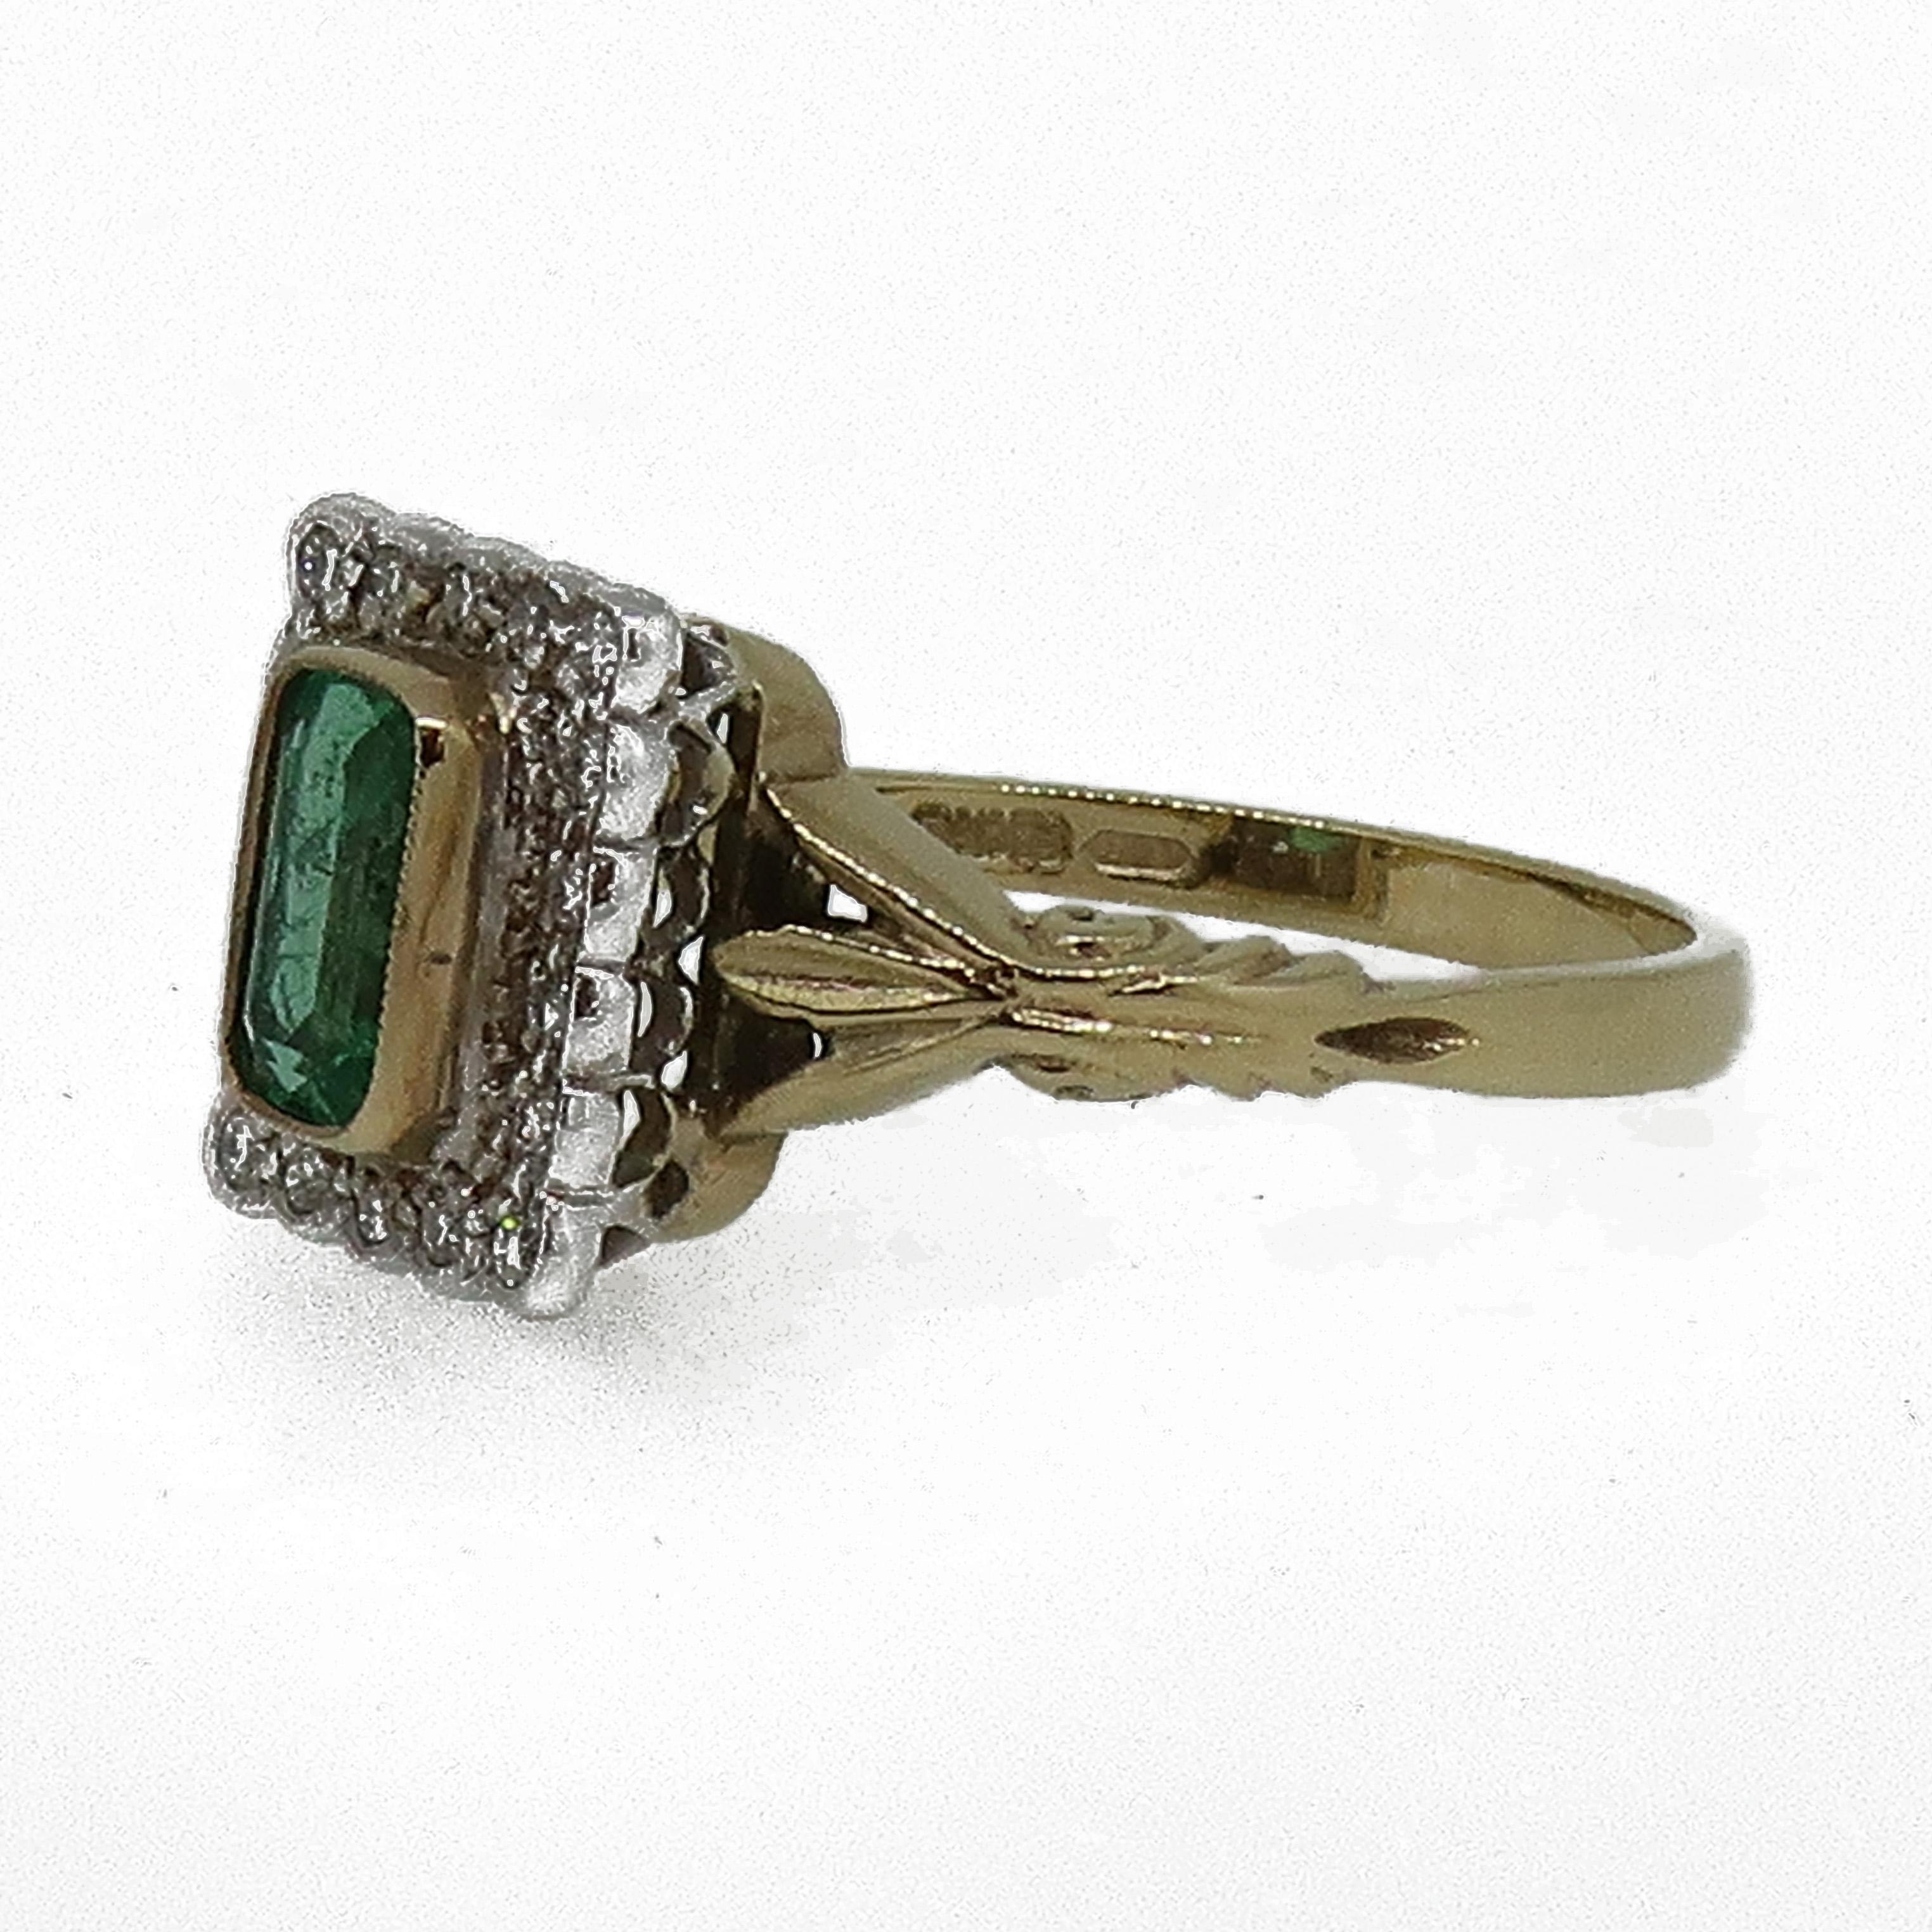 9 Karat Gold Square Emerald Cut Emerald & Diamond Art Deco Style Cluster Ring.

A classic looking emerald-cut green emerald set in a fine yellow gold bezel weighing 0.73ct, surrounded by sixteen white round brilliant cut diamonds all set in a fine